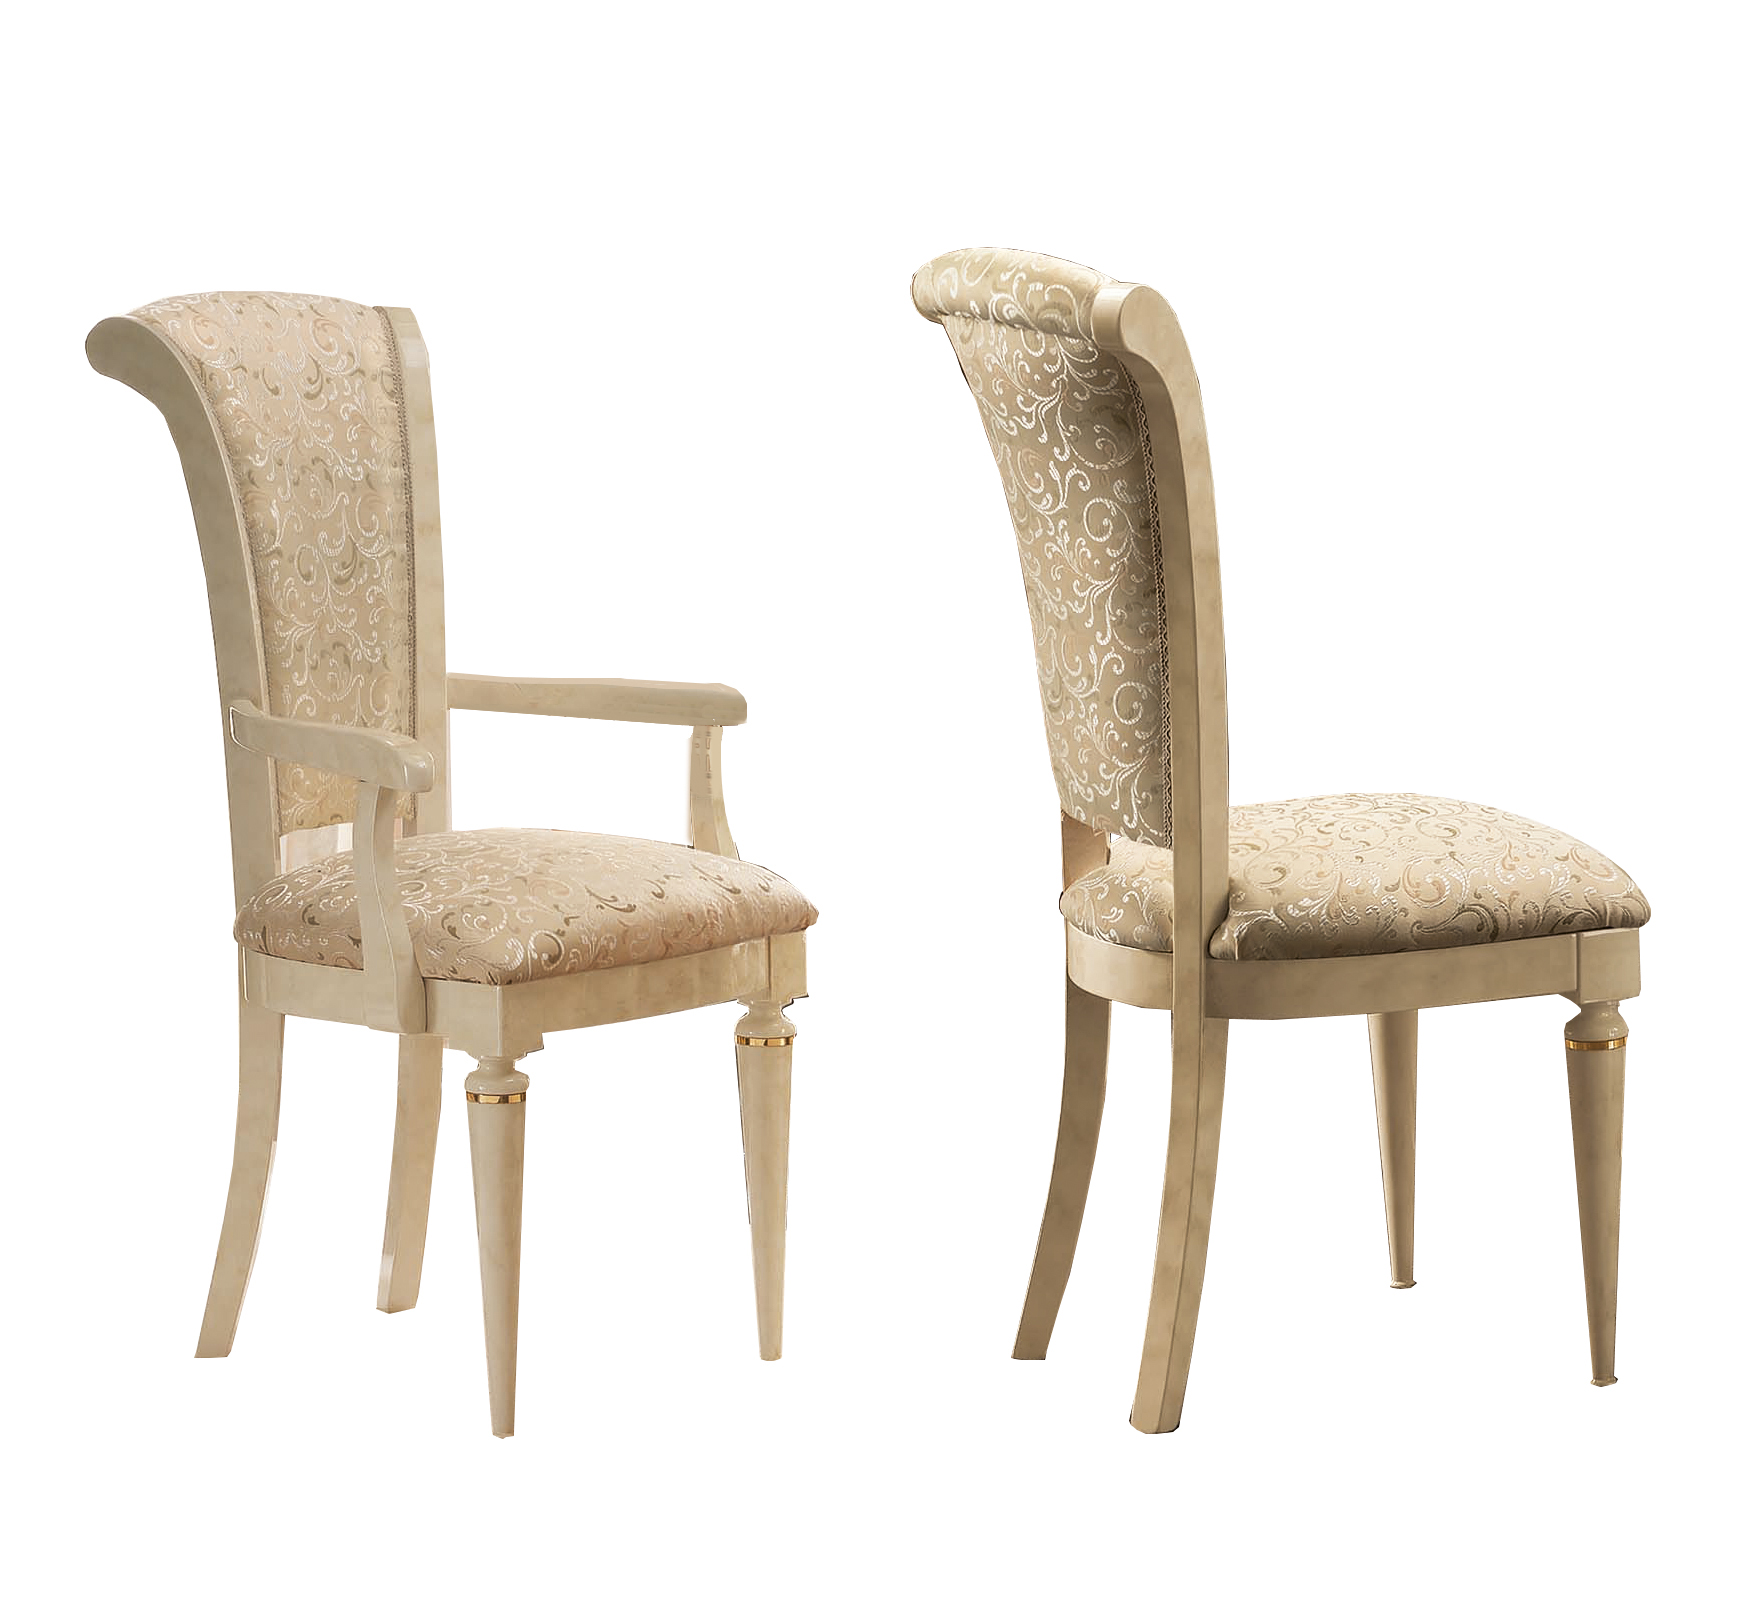 Brands Garcia Laurel & Hardy Tables Fantasia Chair by Arredoclassic